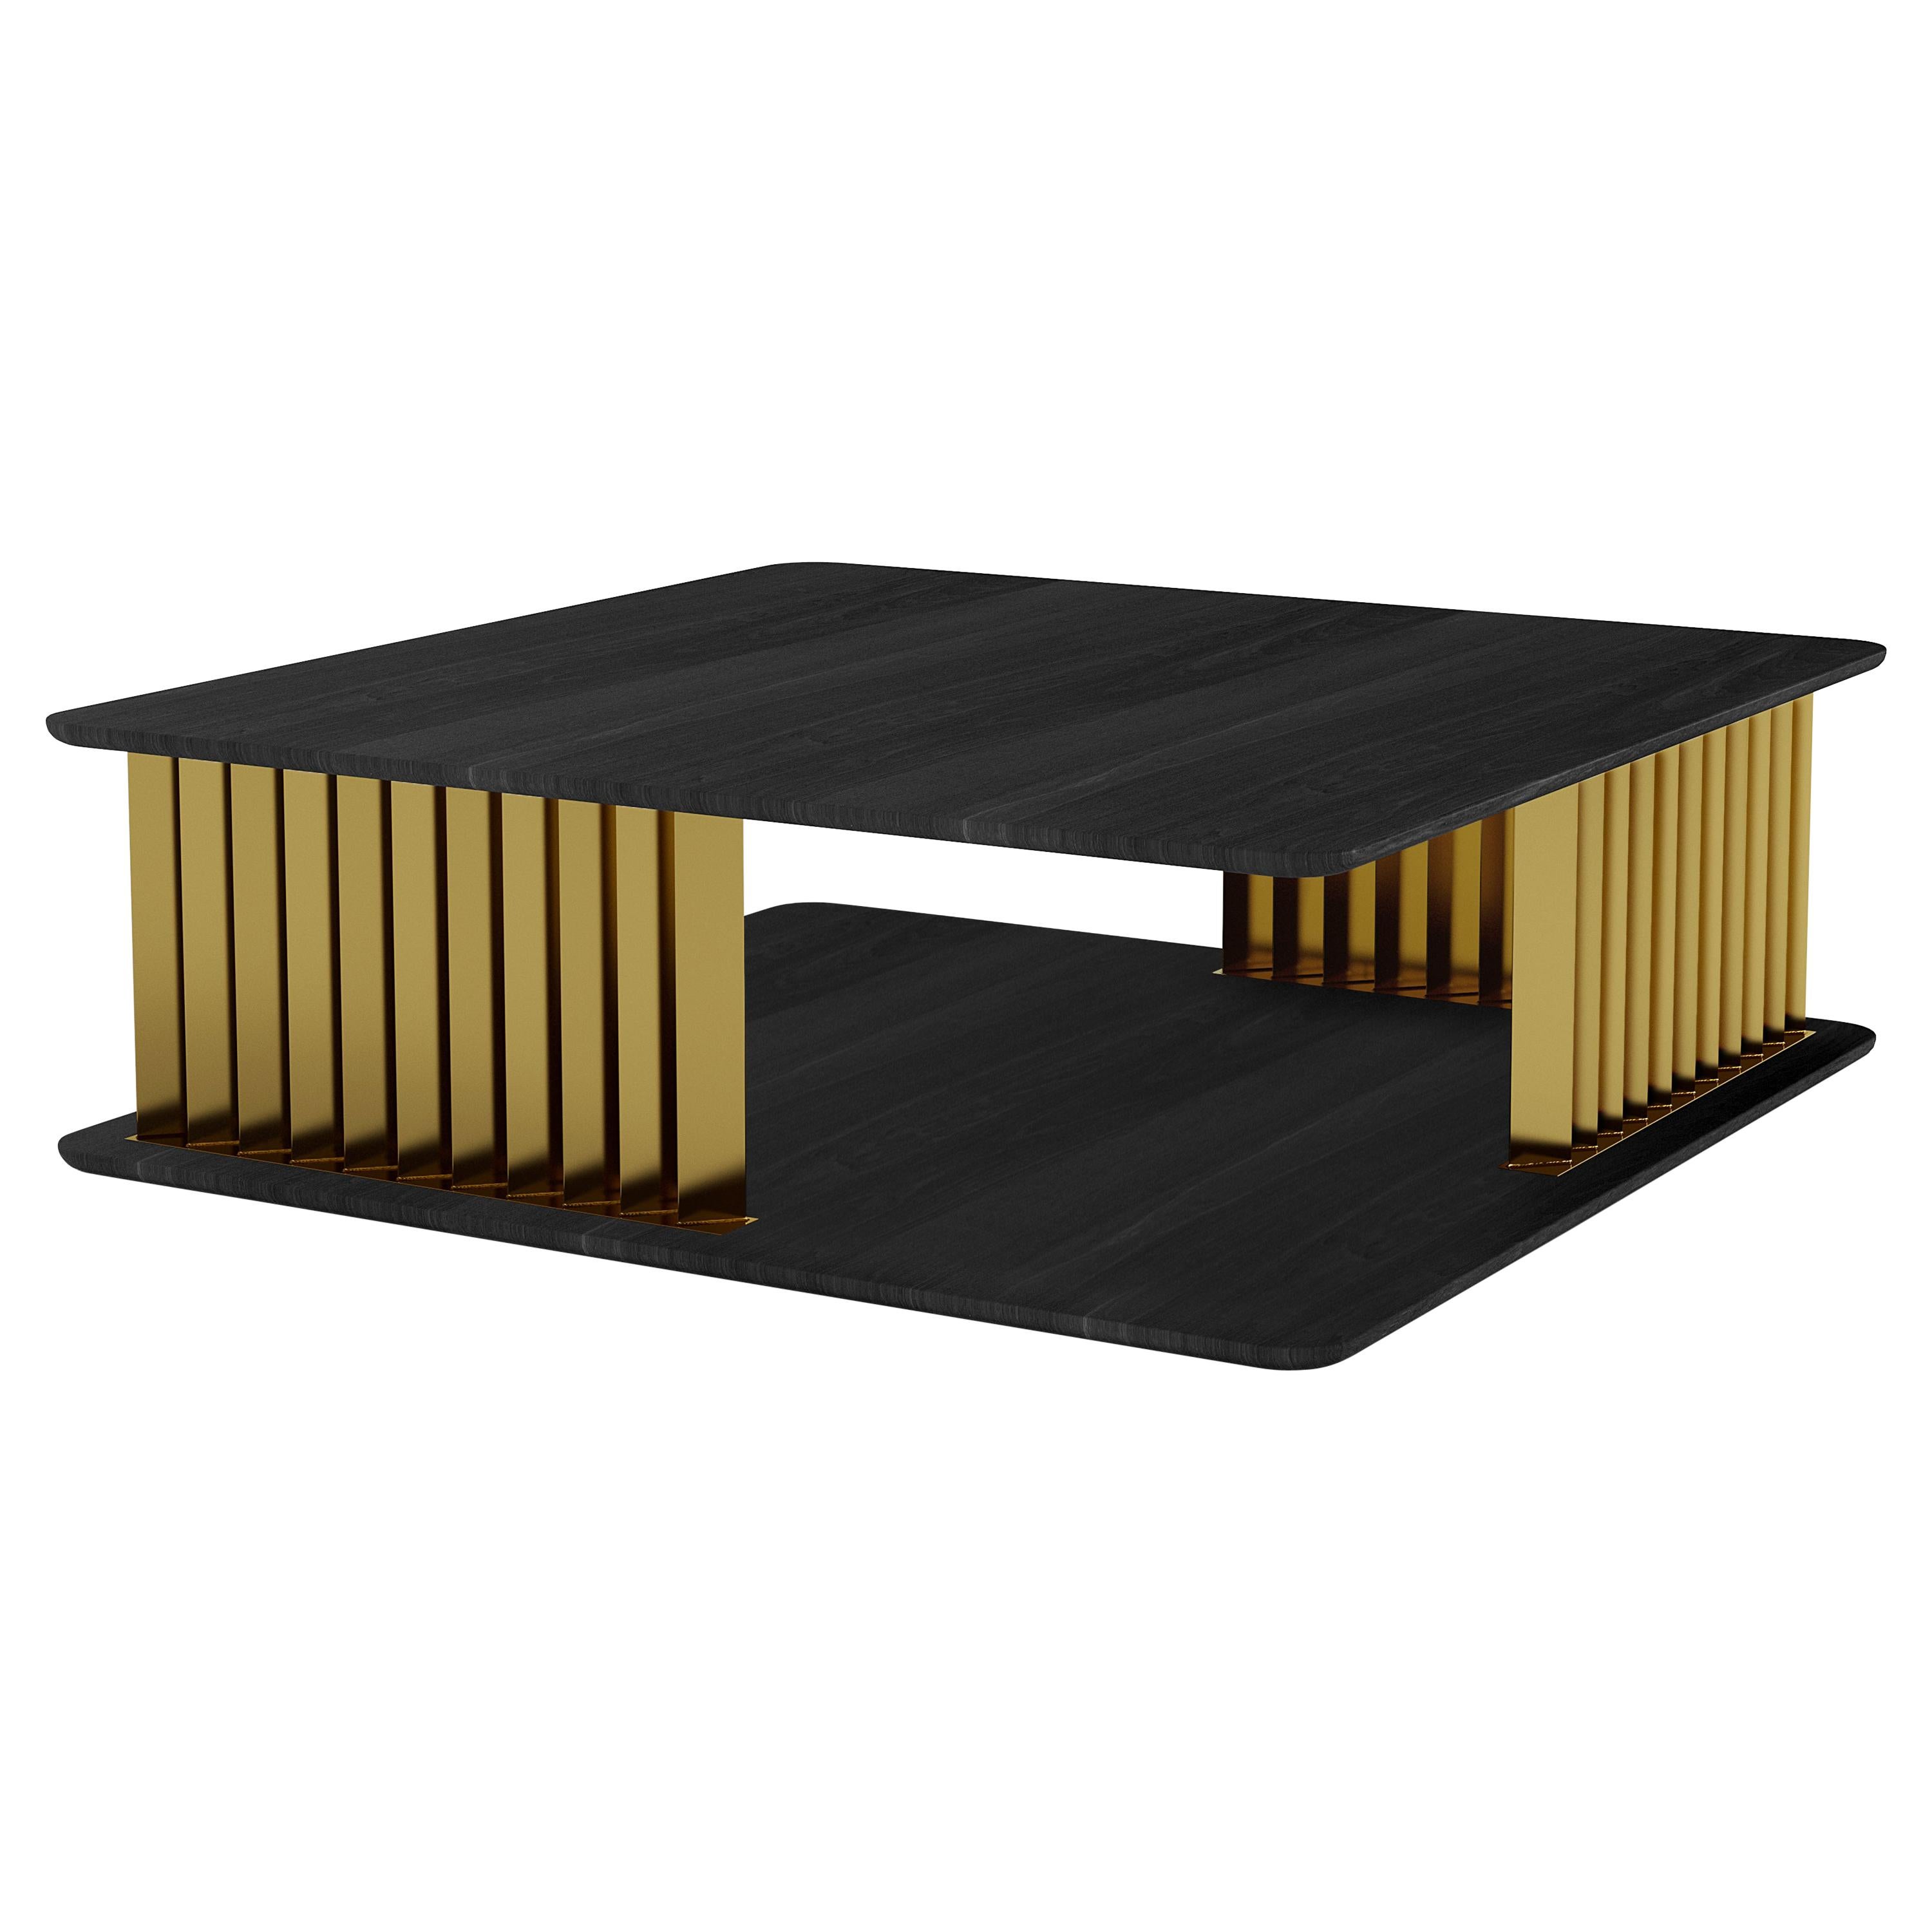 Plateau Square Coffee Table in Black Wood and Brass Structure by NONO